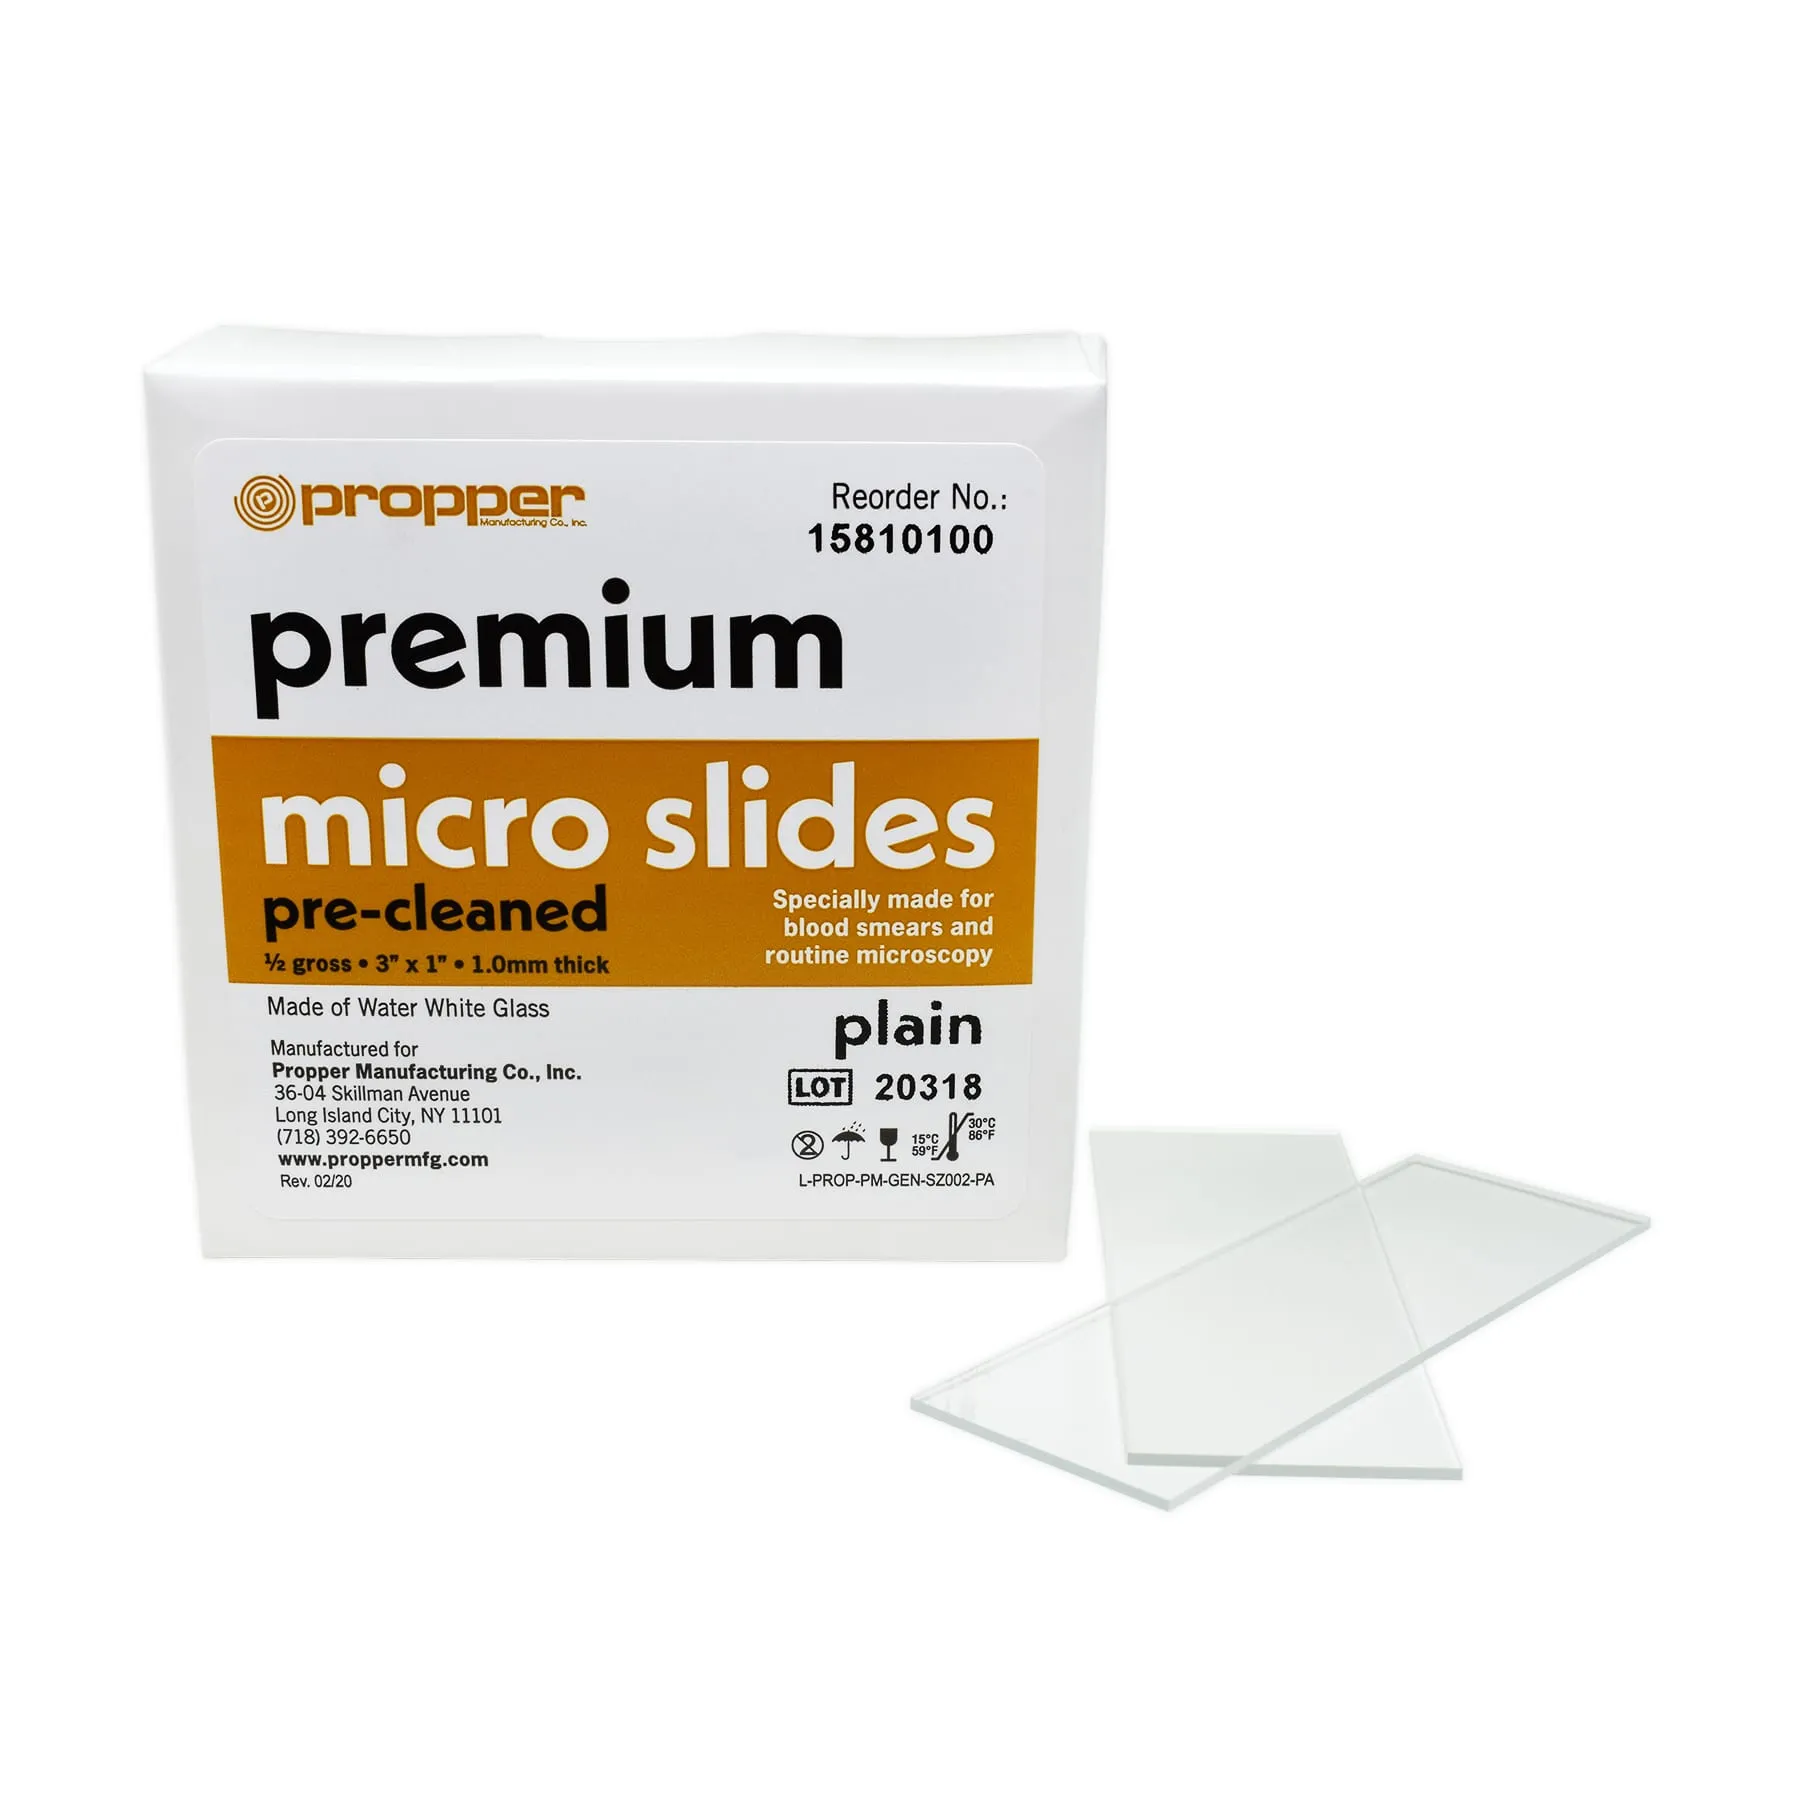 Propper - From: 15810100 To: 15812100 - Manufacturing Premium Microscope Slides